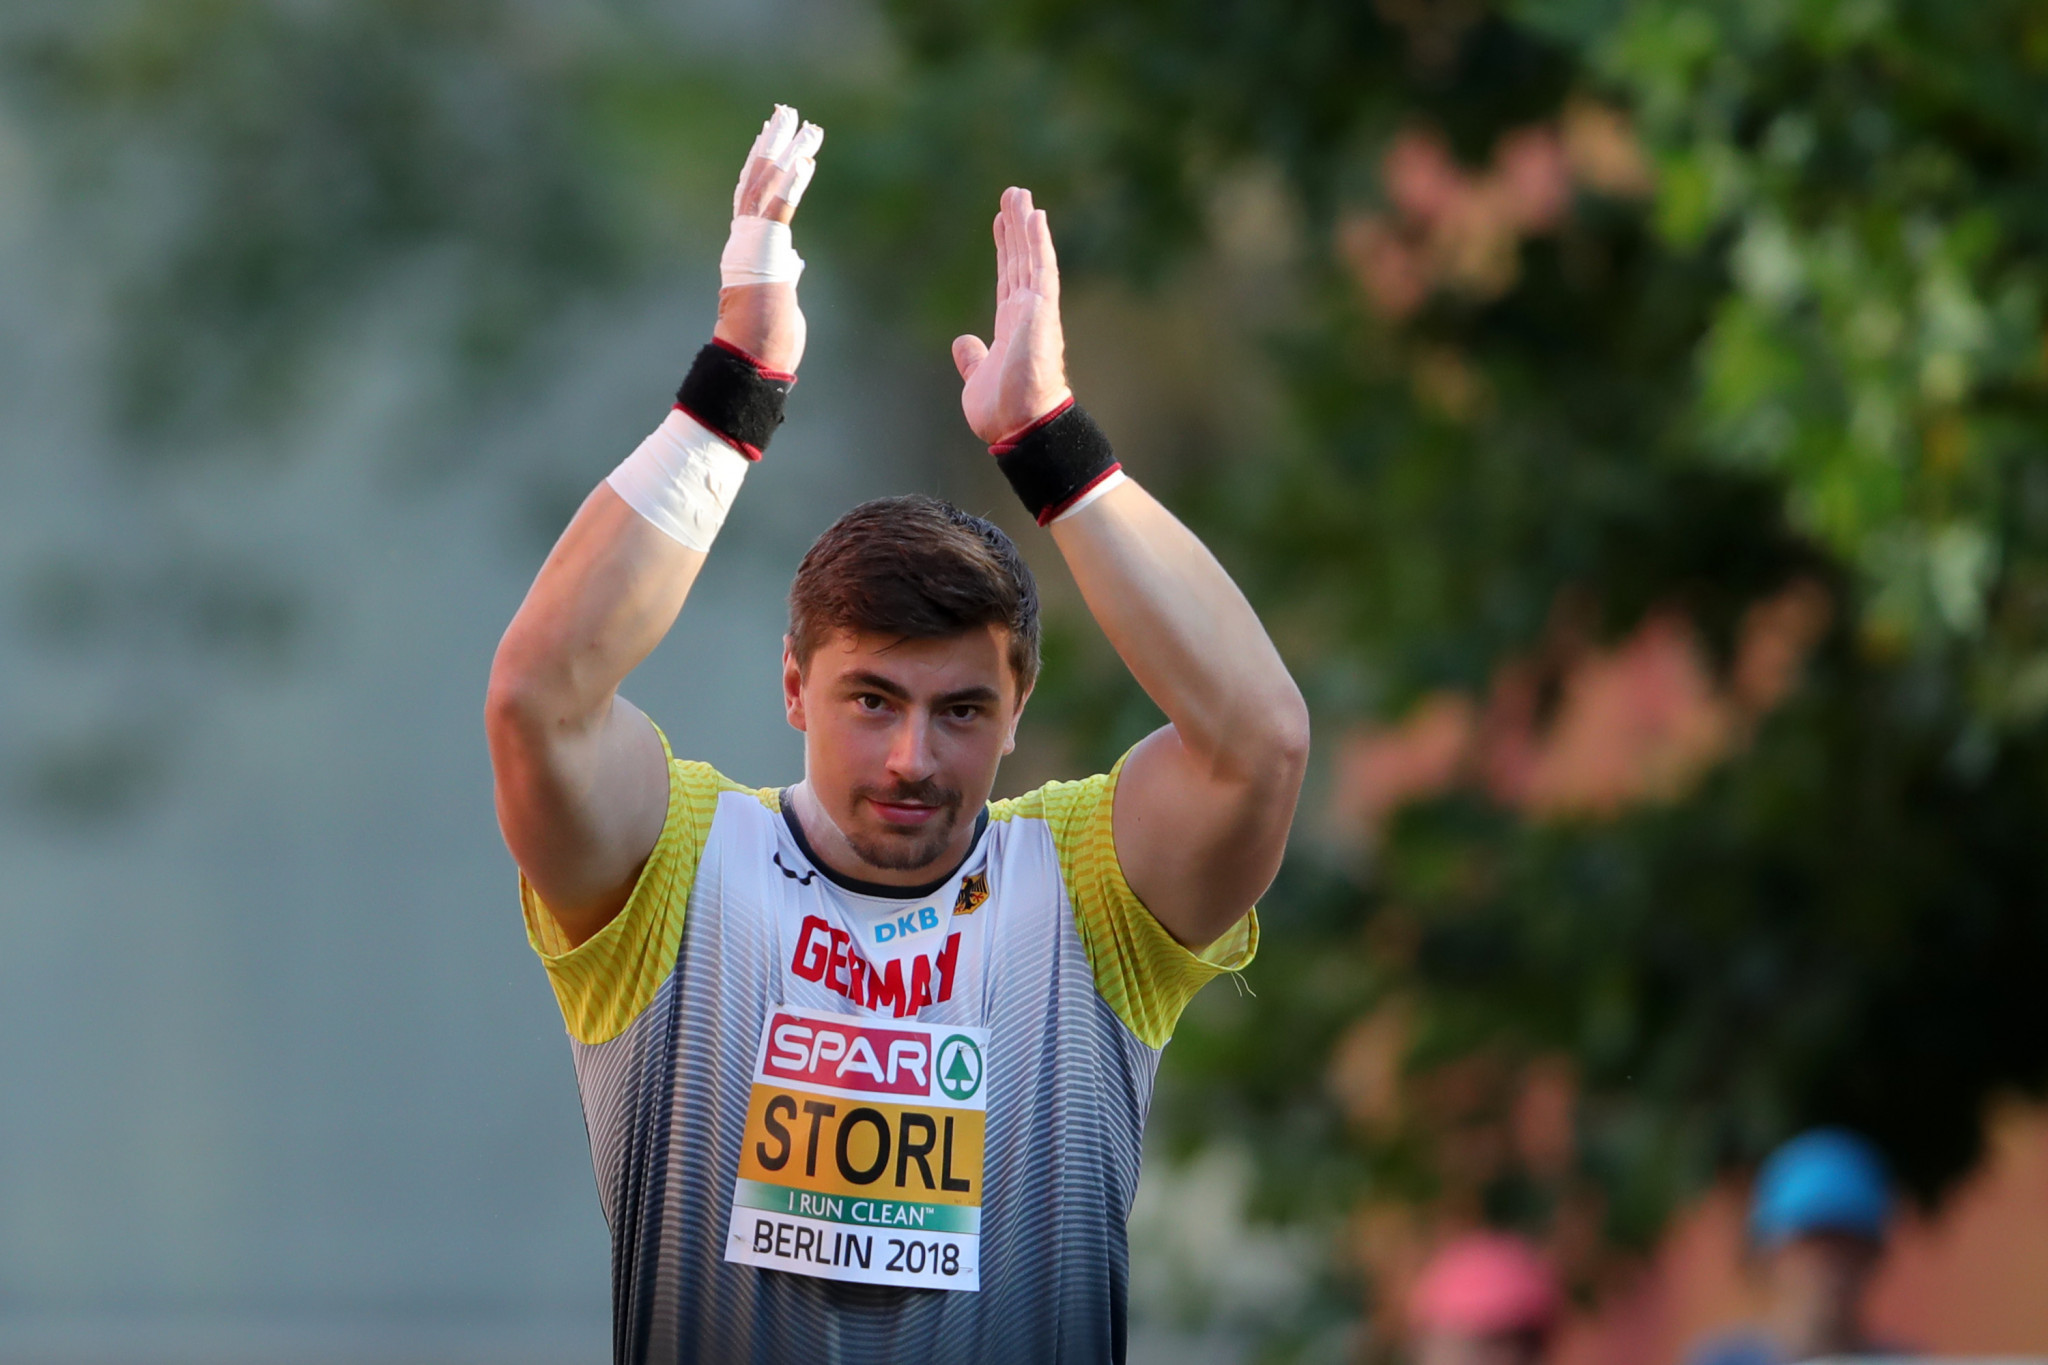 Storl rises to home expectations in European Mile showcase as he seeks fourth shot put title